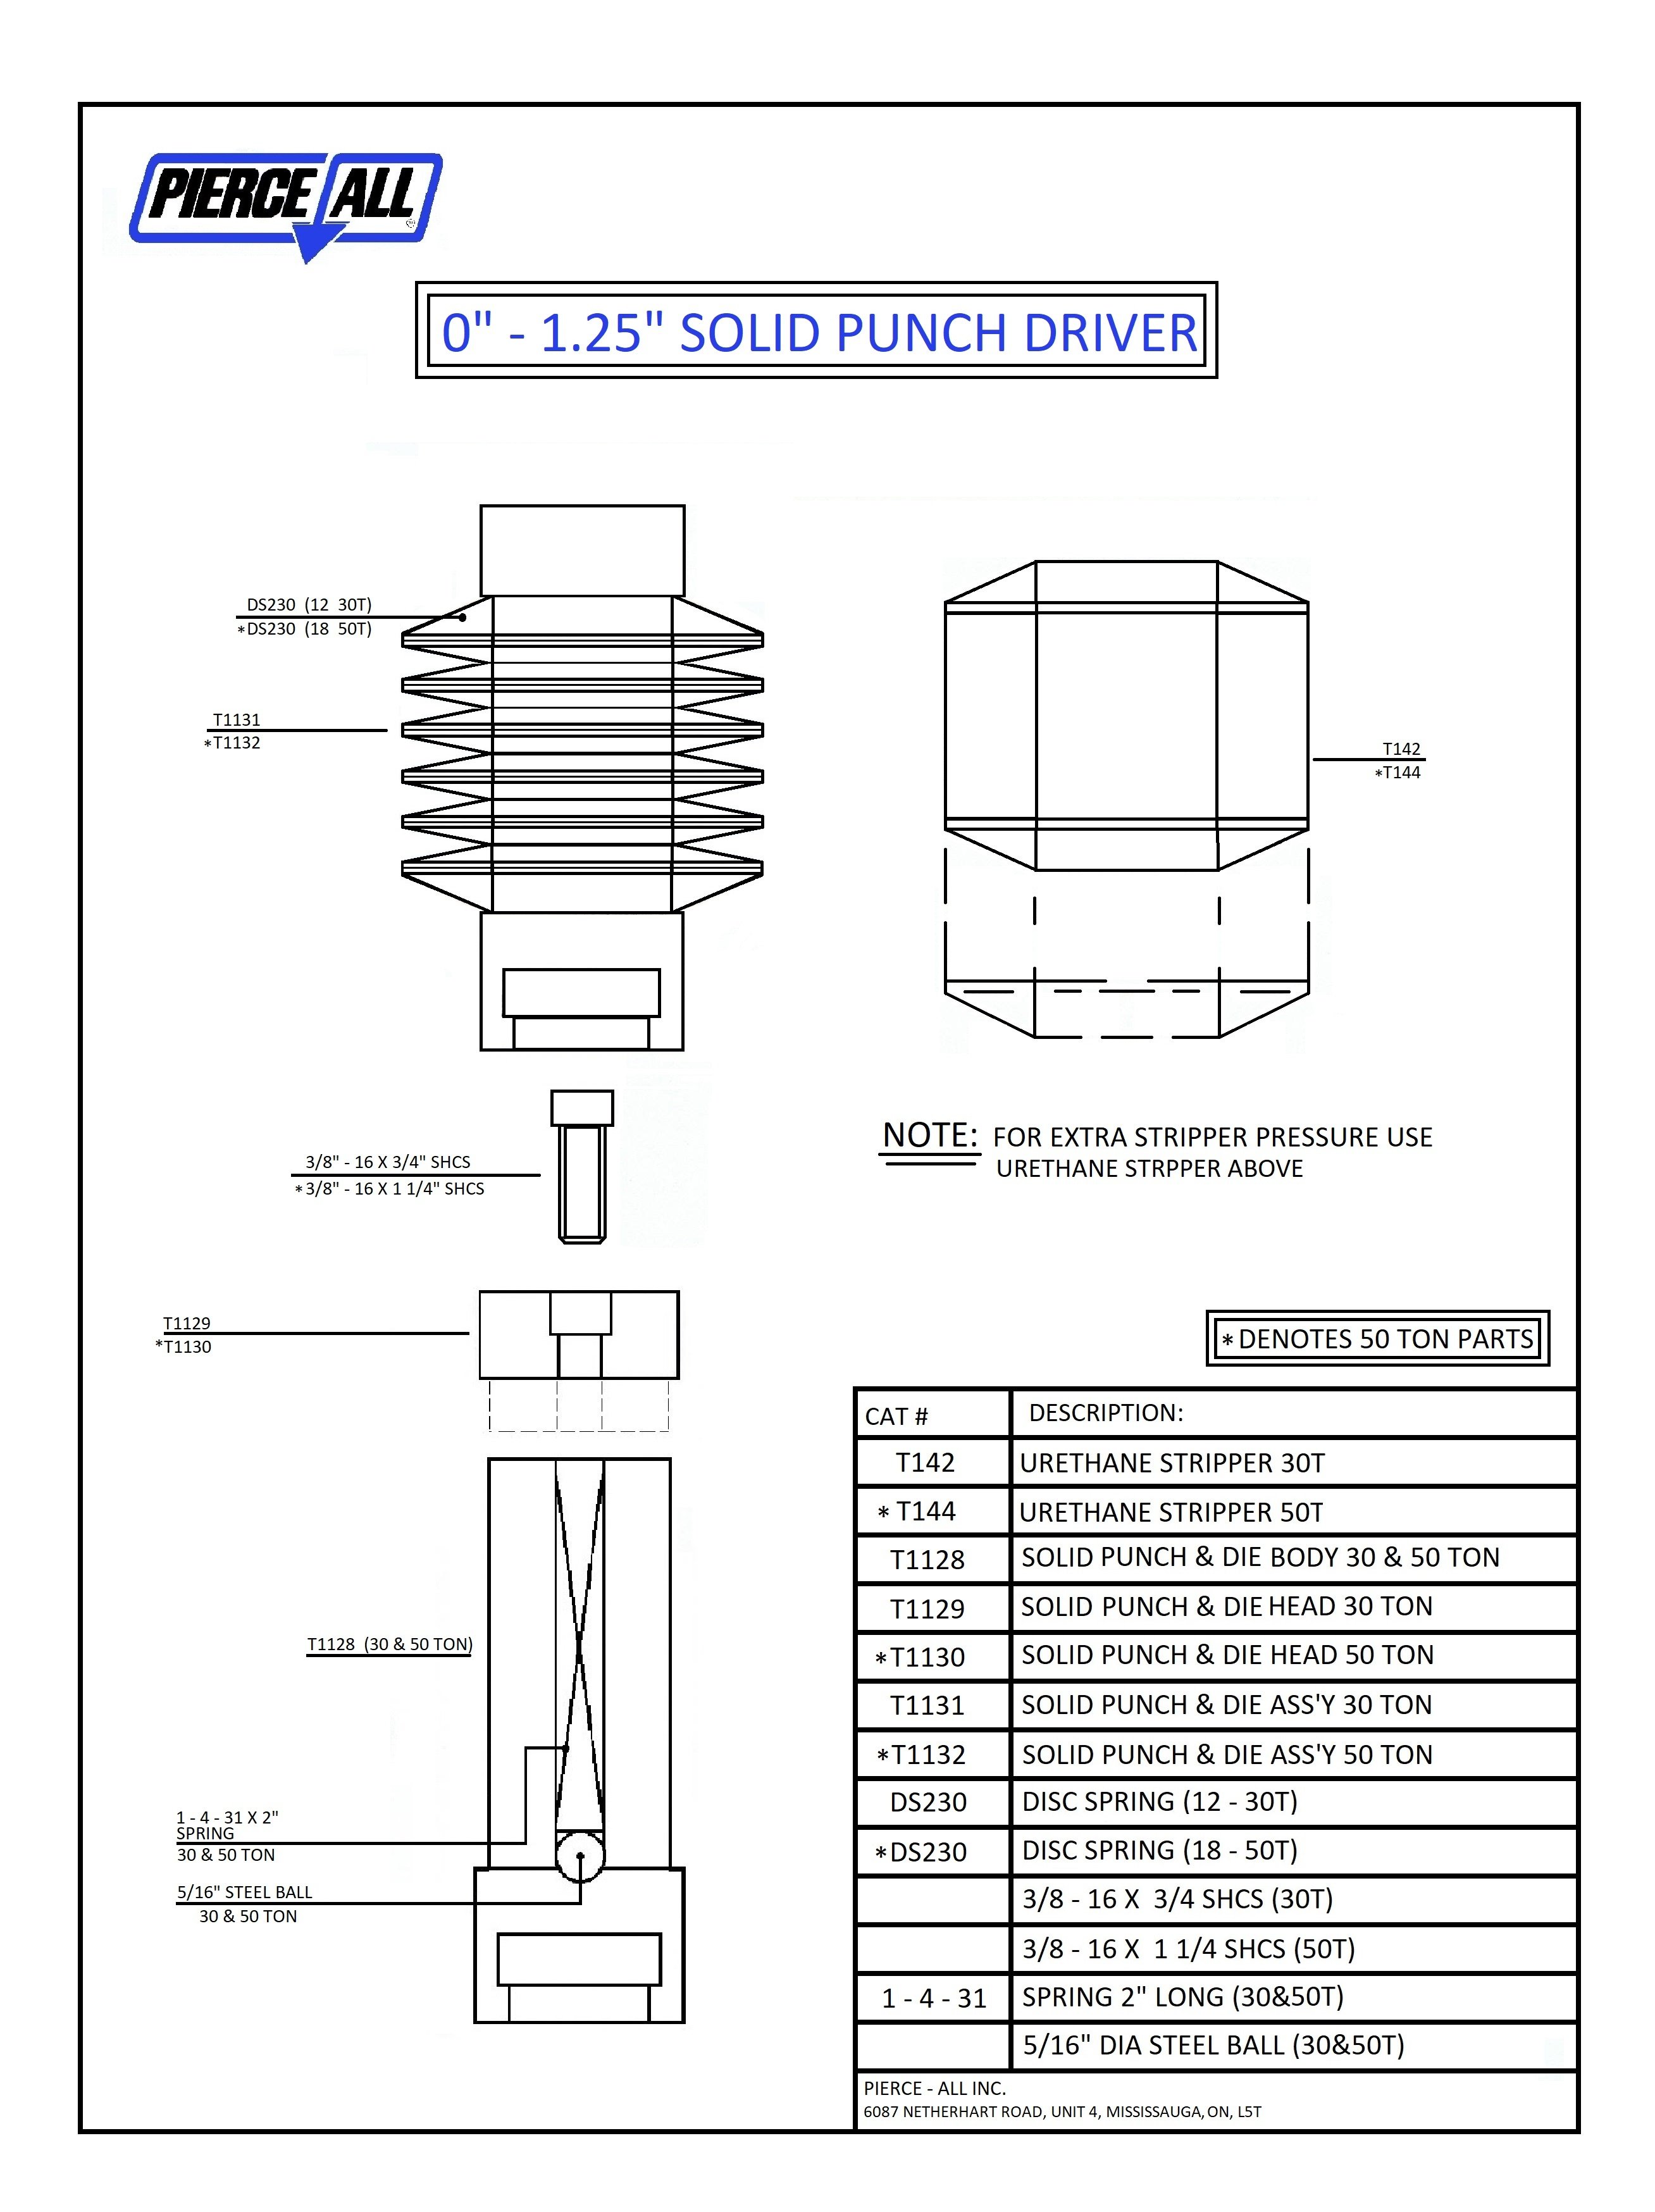 0''-1.25'' Solid Punch Driver